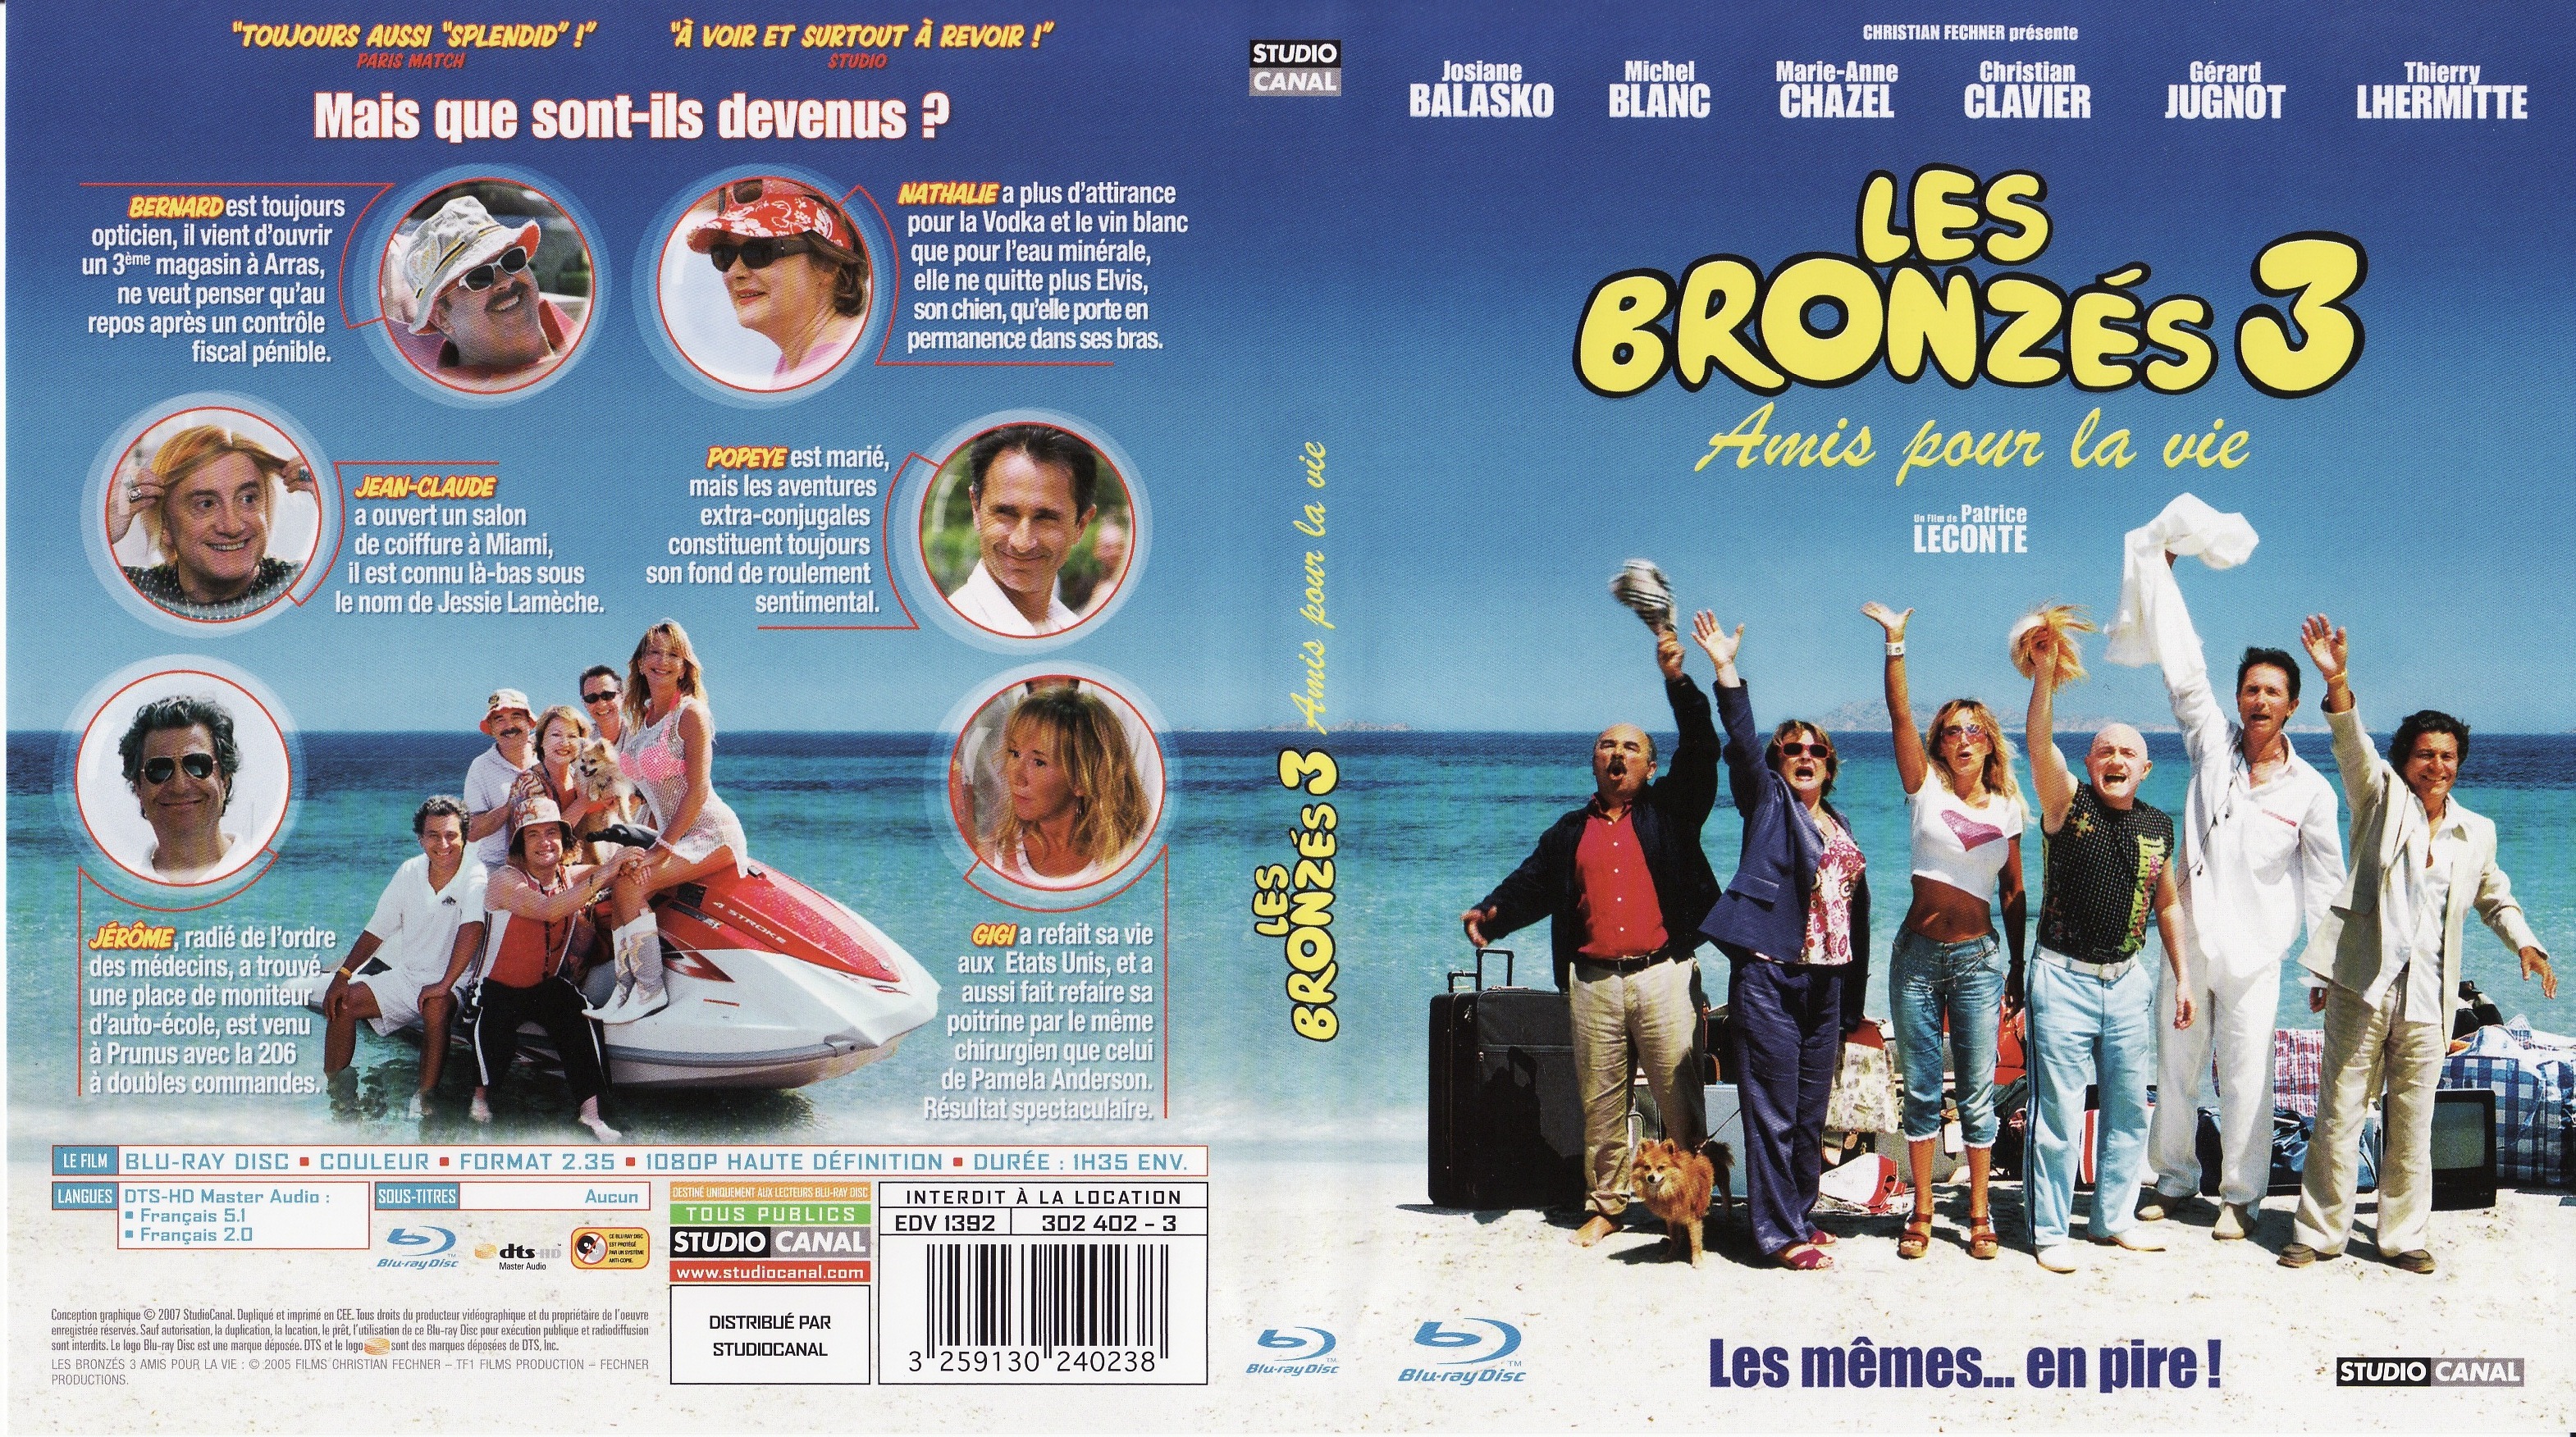 Jaquette DVD Les bronzs 3 (BLU-RAY)